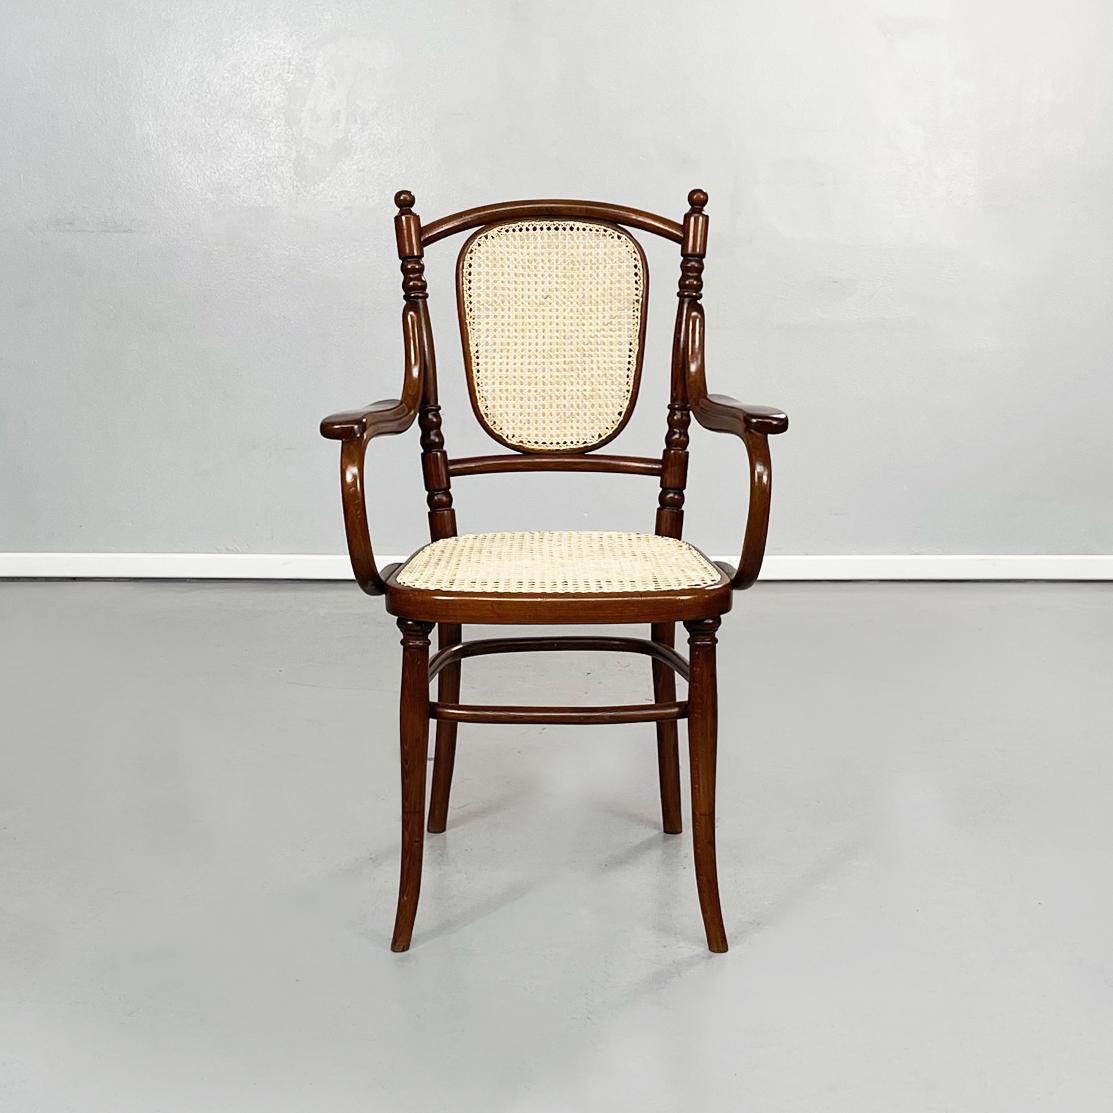 Austrian mid-century chairs with straw and wood, 1950s
Set of 3 chairs with square seat, with rounded corners in straw. The structure is in dark wood, finely worked. The backrest is composed of two vertical rods worked that has in the middle a